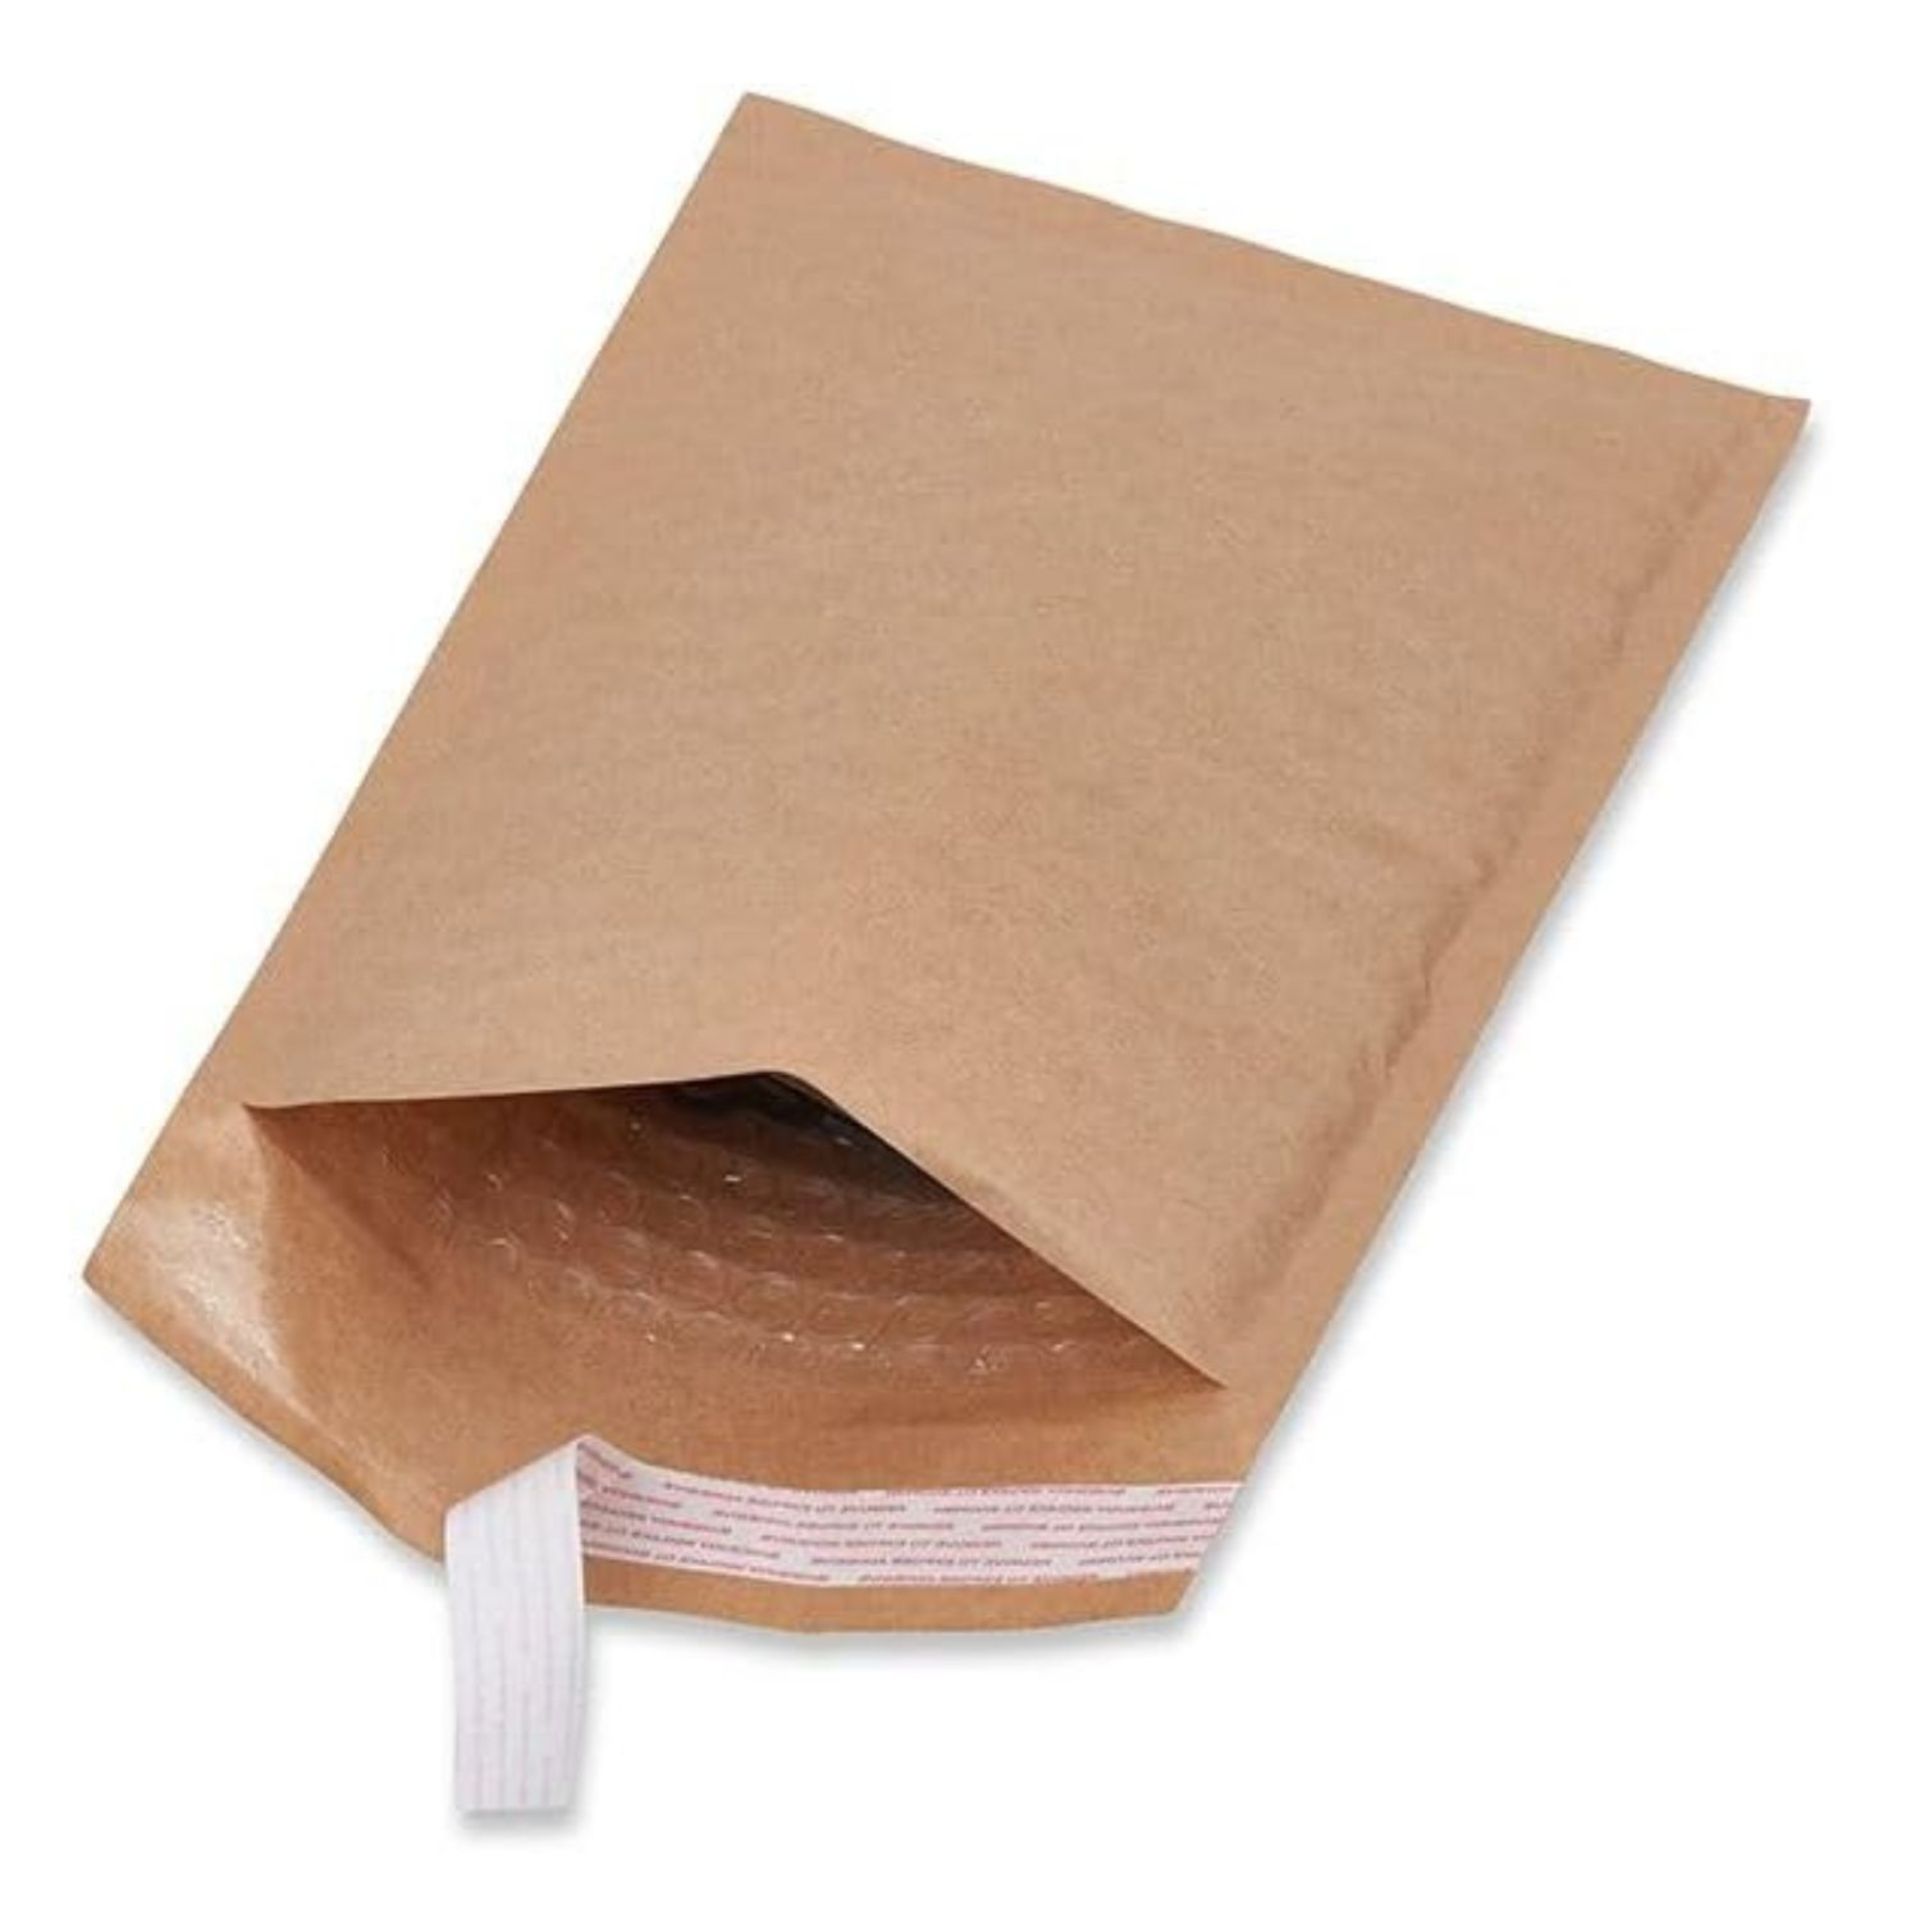 1000 BUBBLE ENVELOPES WITH PEEL AND SEAL TOUGH LIGHT PADDED (120 X 165MM) - Image 2 of 4